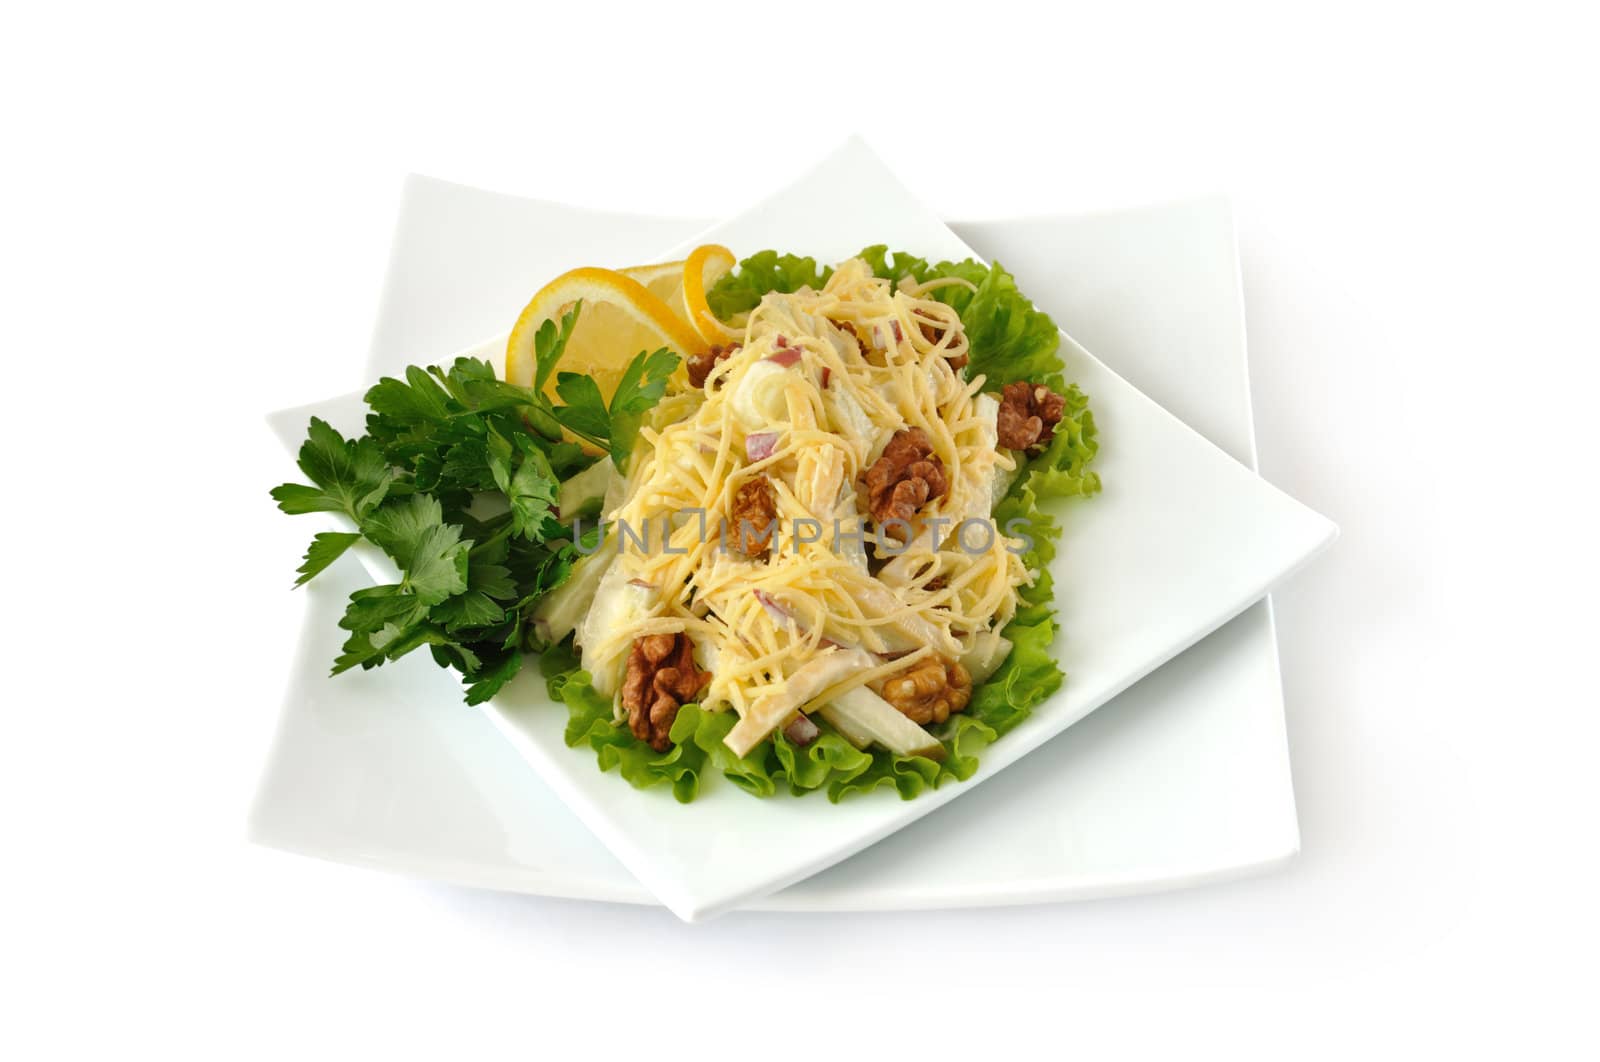 Salad with cheese and apple, walnuts and yogurt on lettuce leaves with lemon isolated